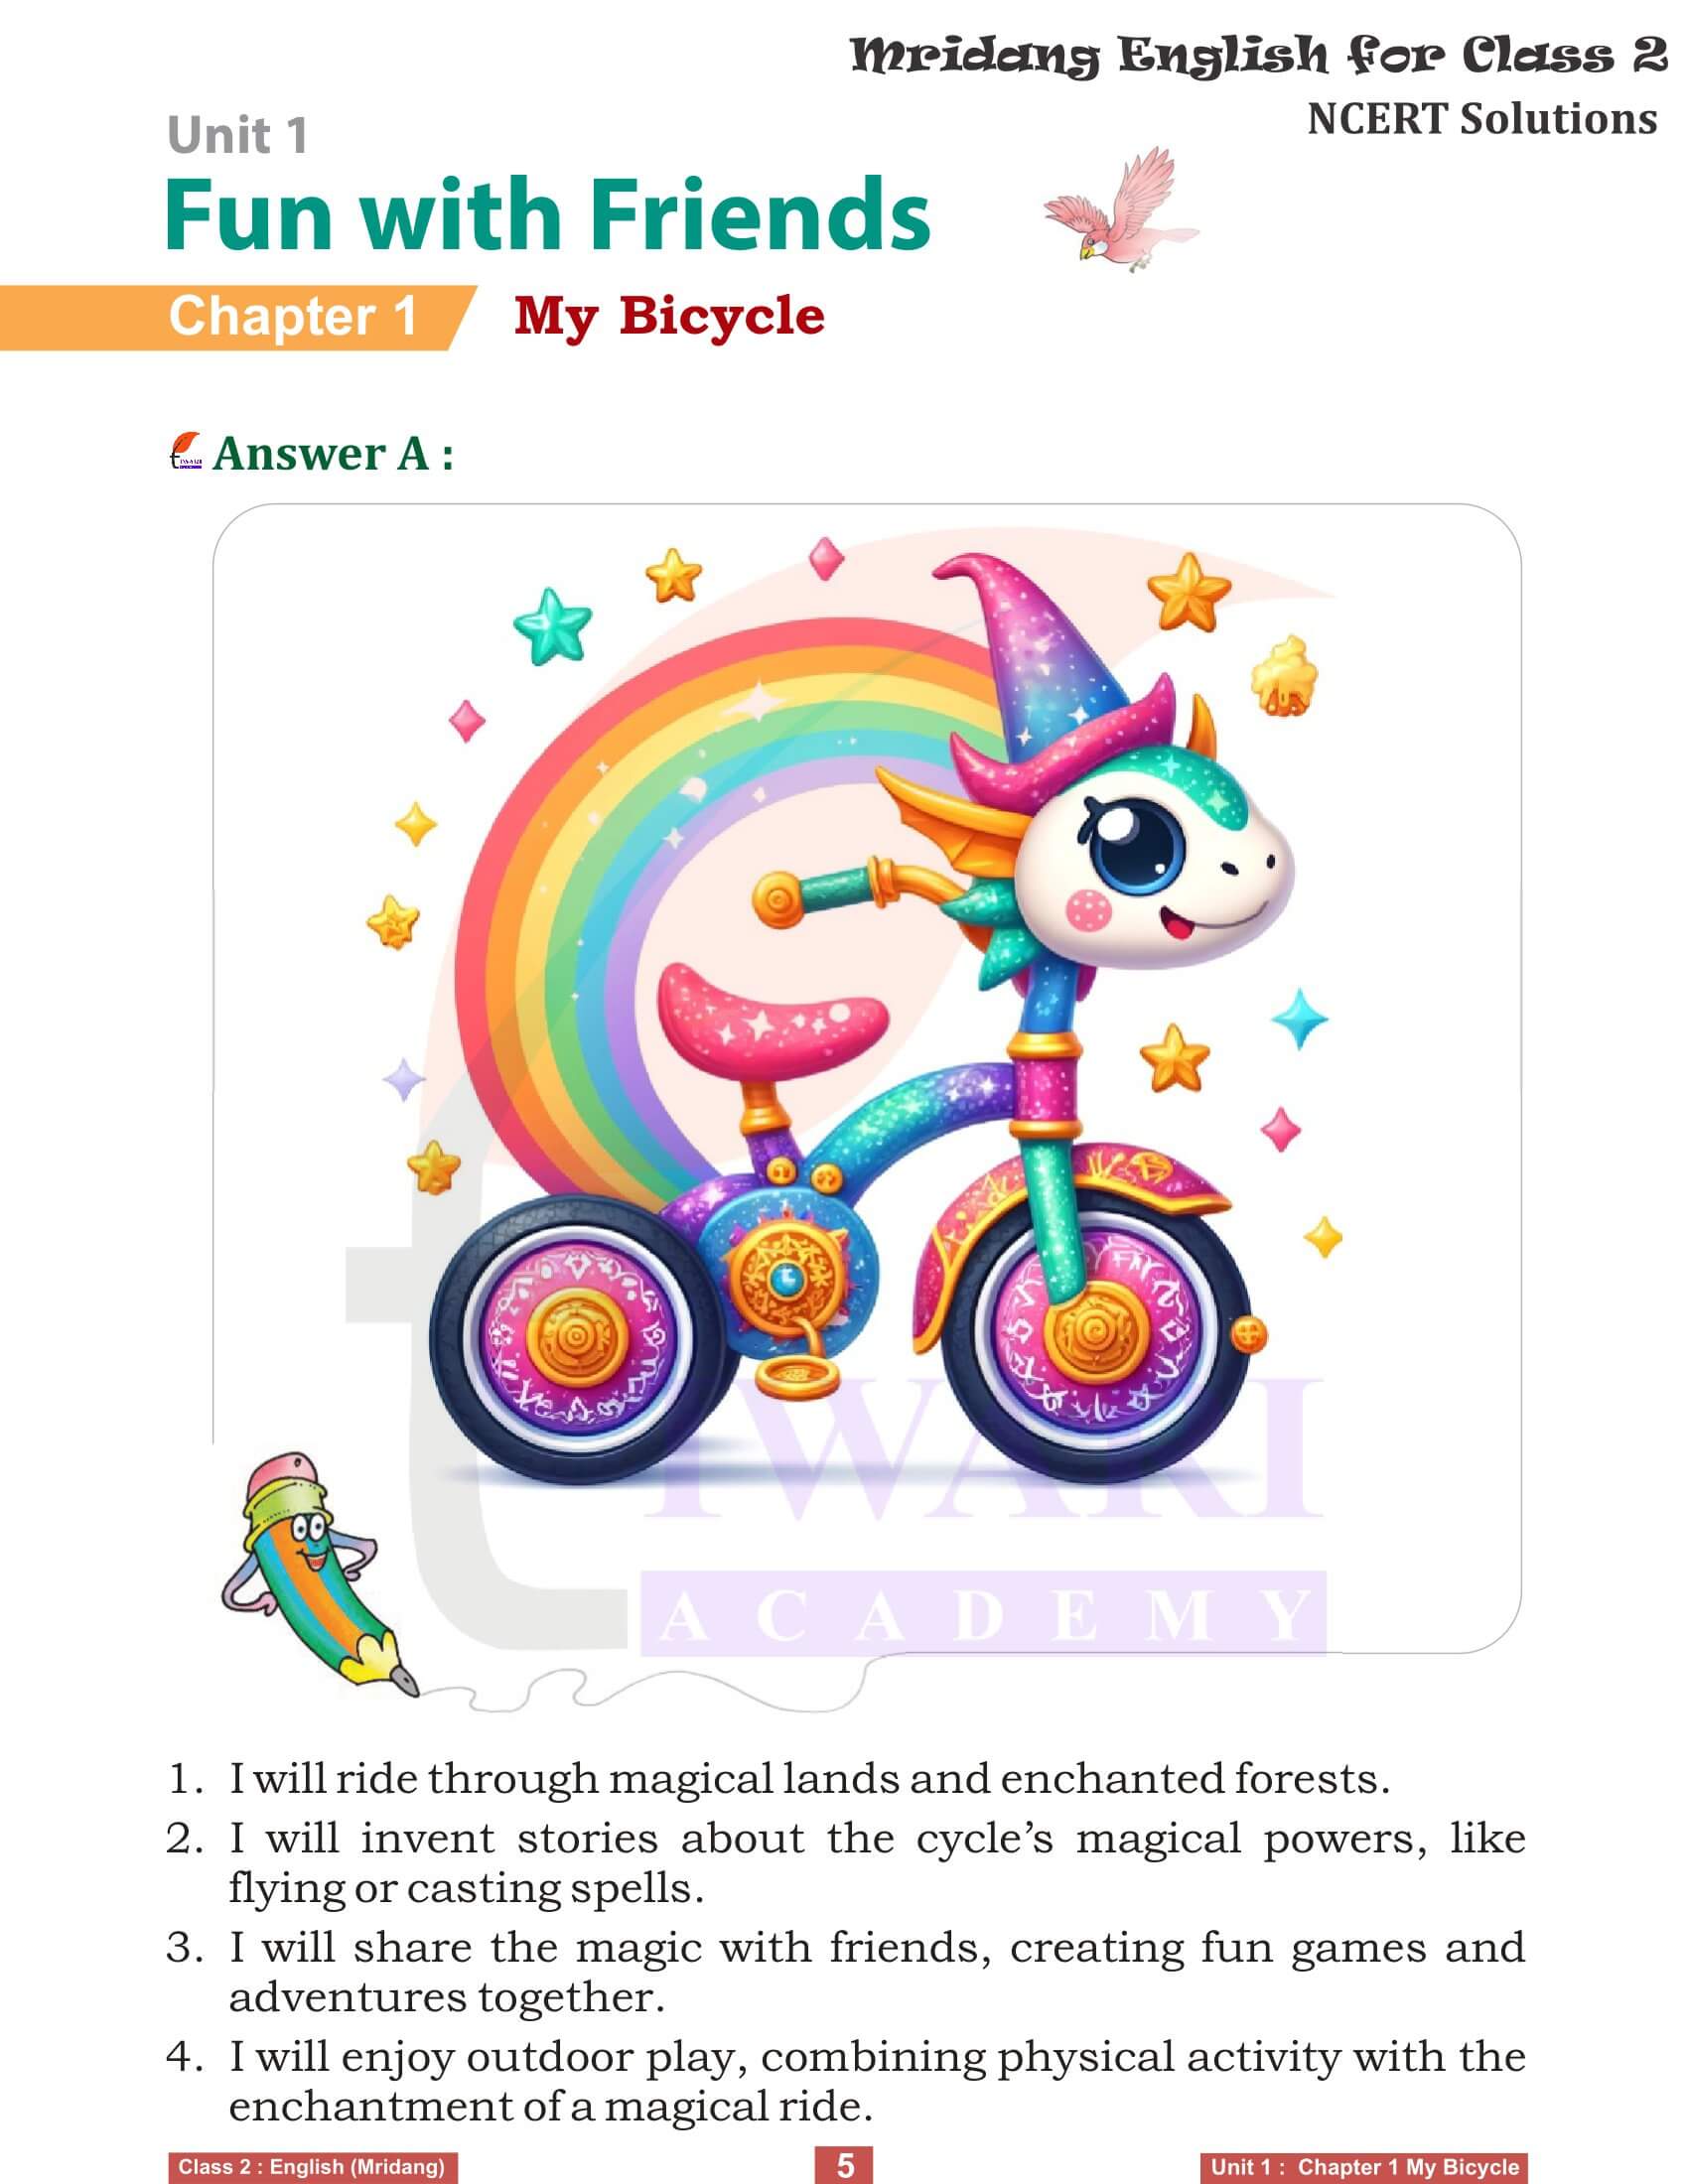 NCERT Solutions for class 2 English Mridang unit 1 Fun with Friends Chapter 1 My Bicycle Questions